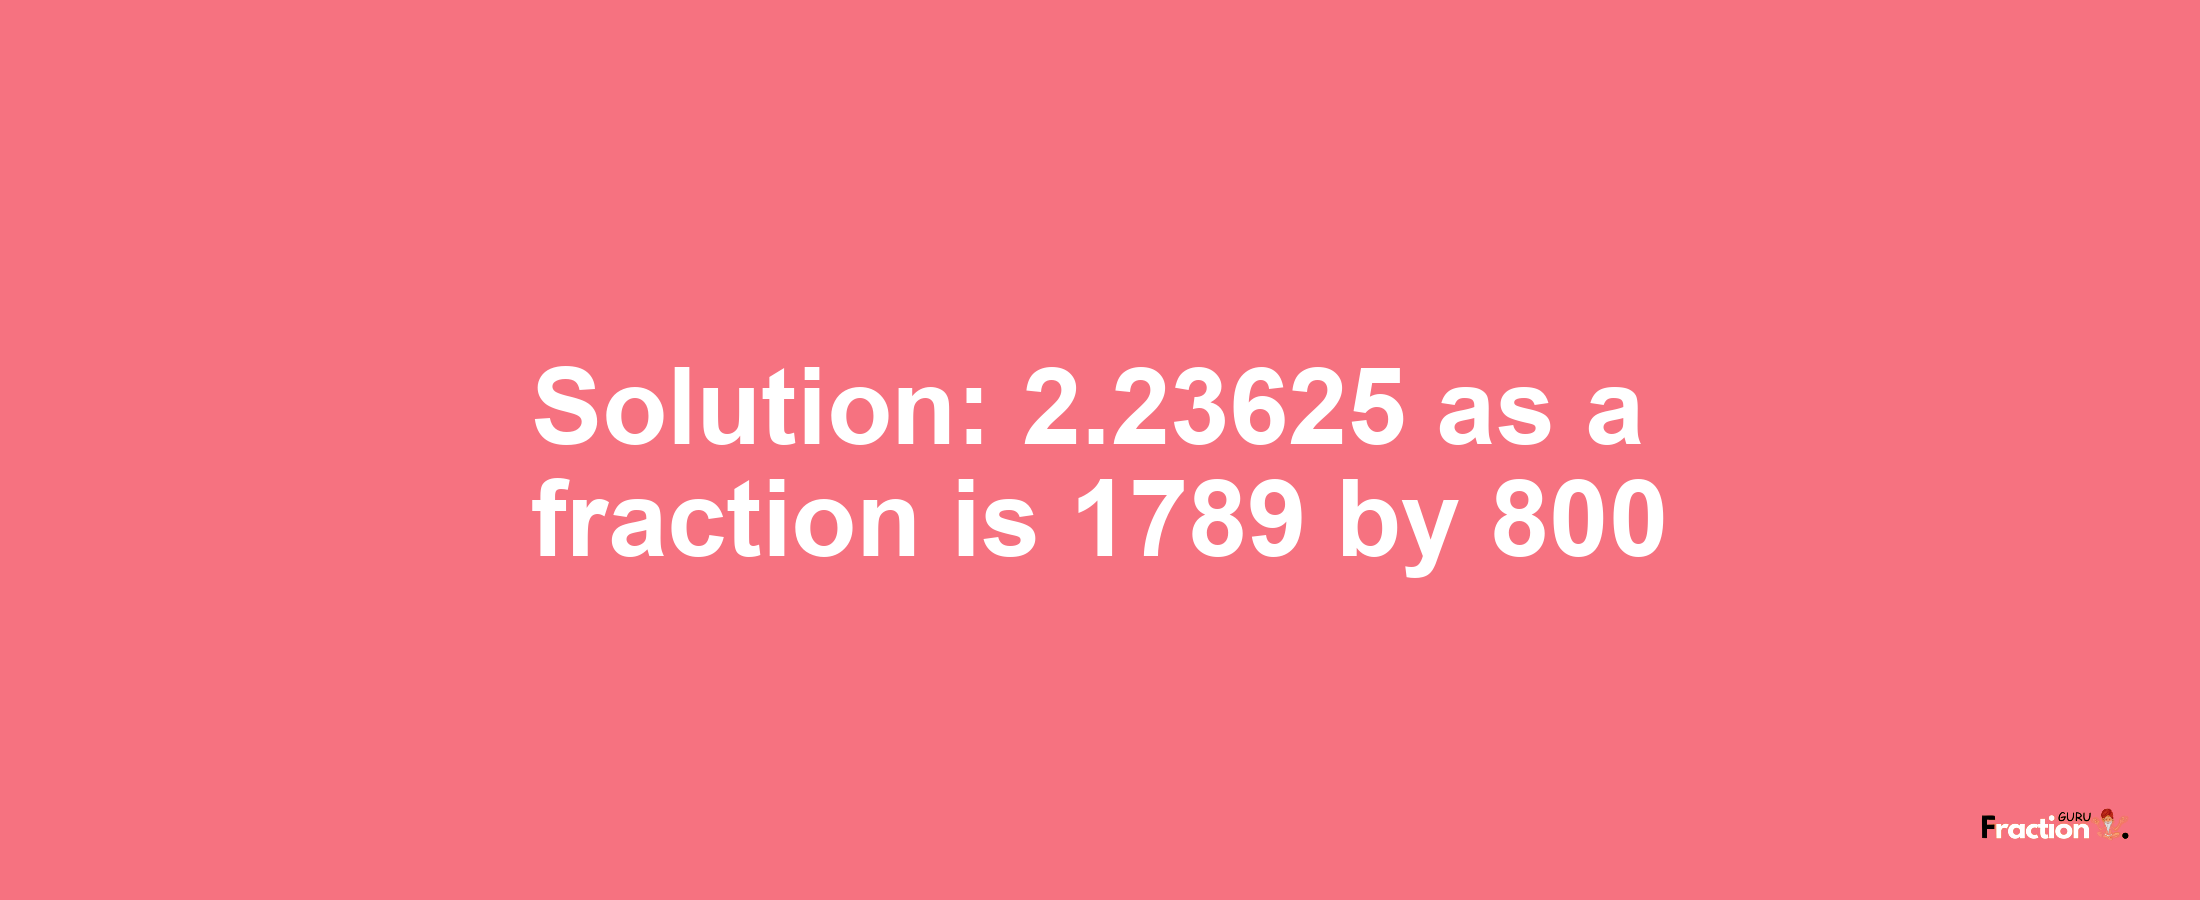 Solution:2.23625 as a fraction is 1789/800